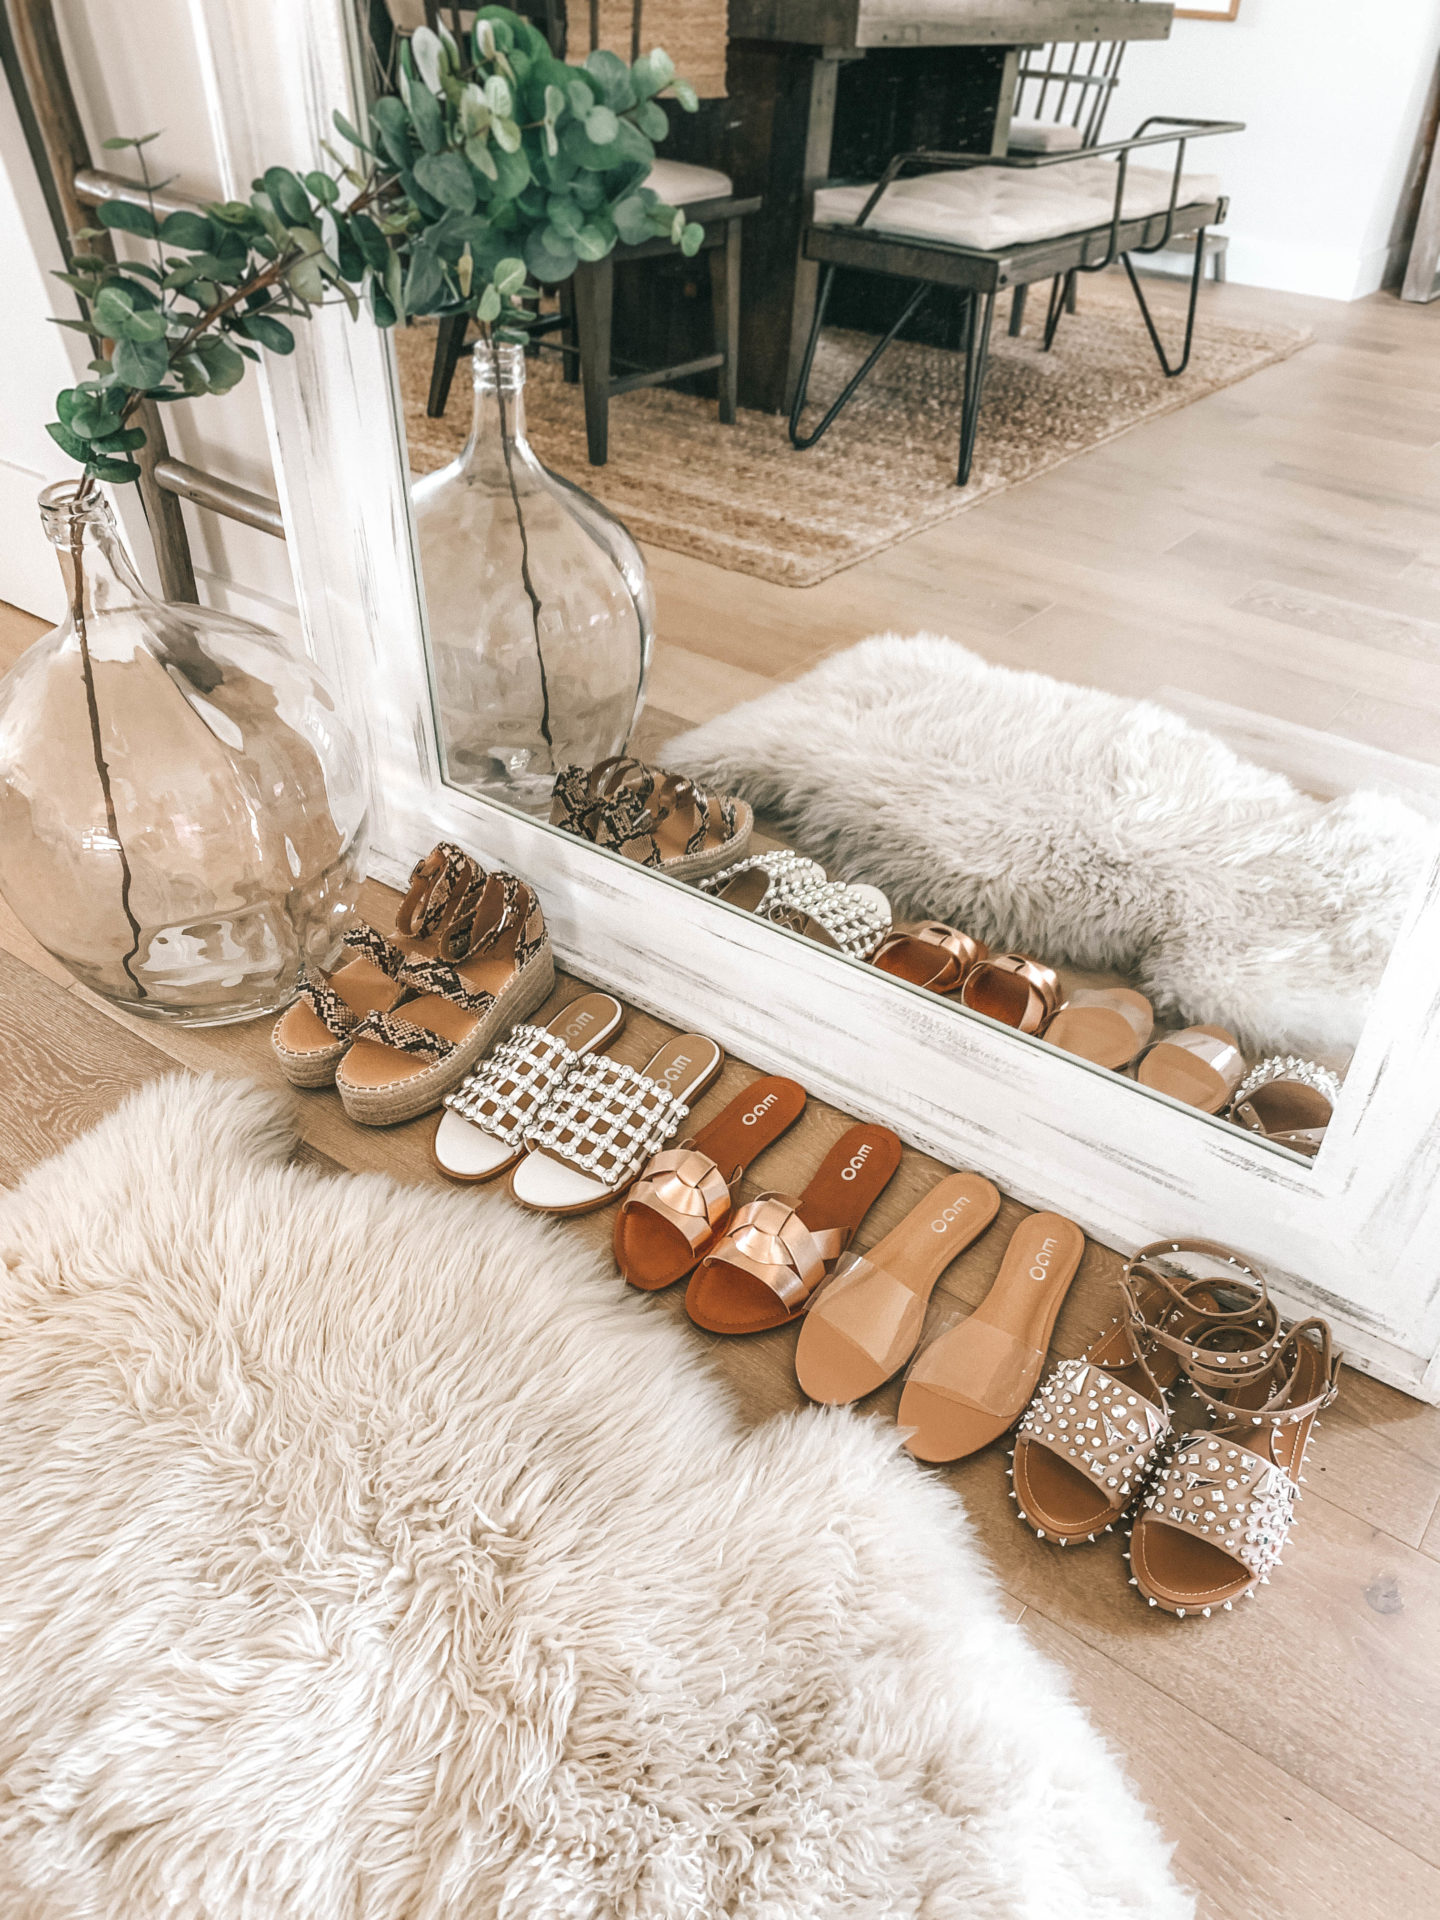 5 Must Have Affordable EGO Sandals for Summer by popular Austin fashion blog, Dressed to Kill: image of 5 pairs of EGO sandals lined up next to each other.